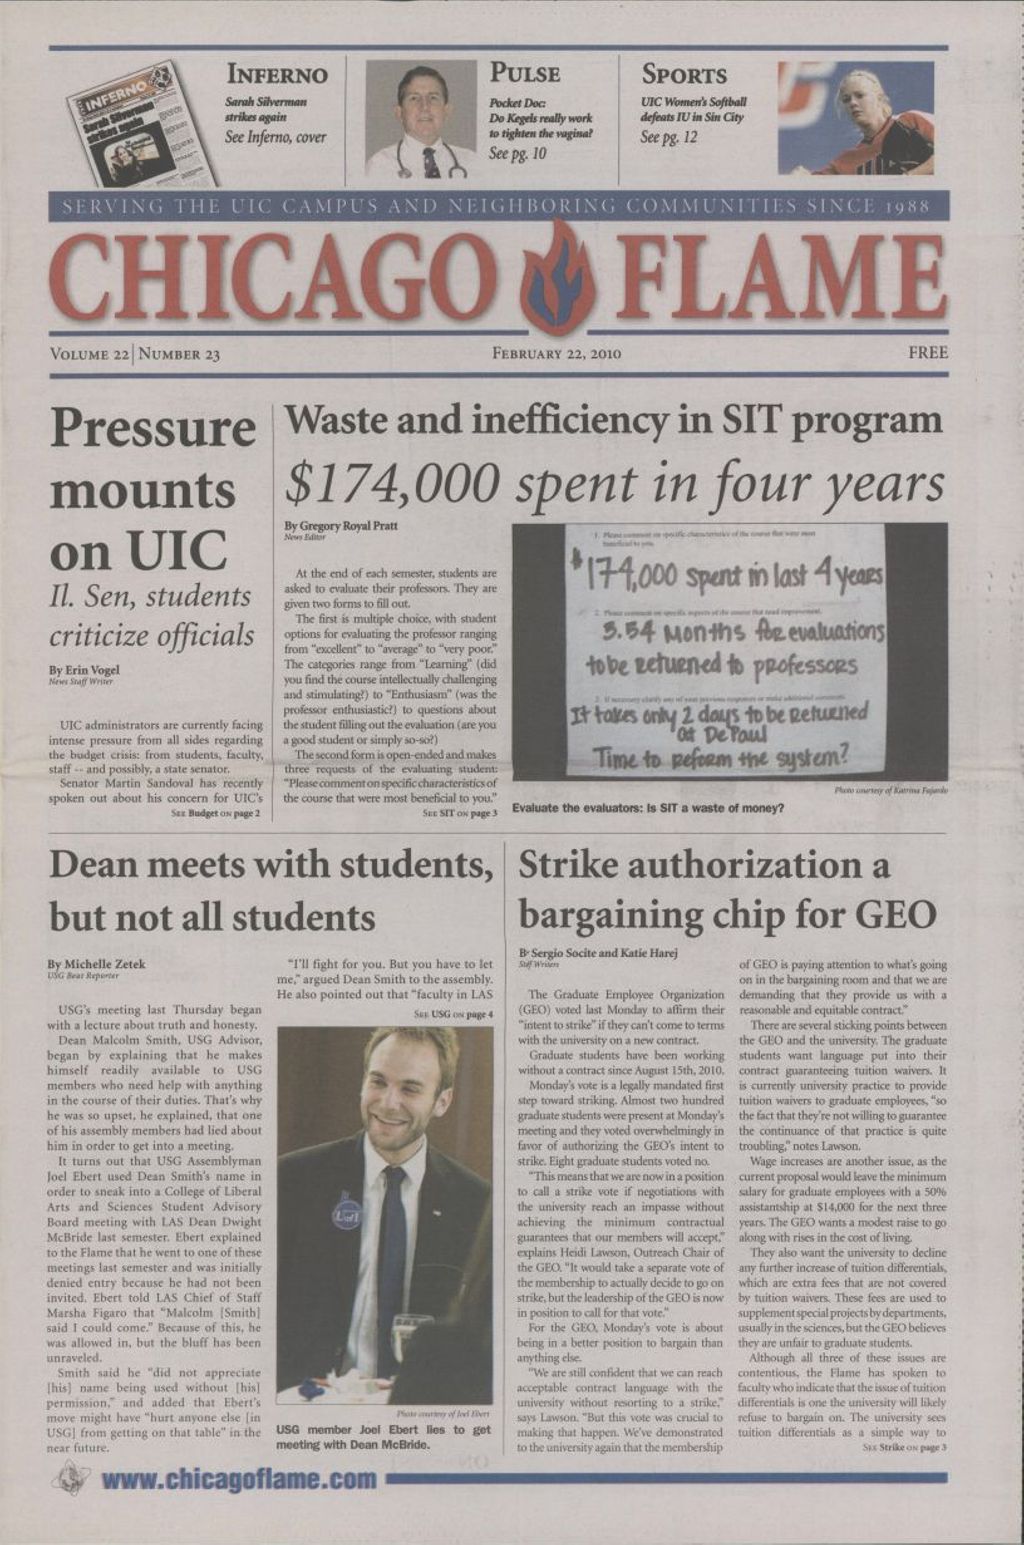 Chicago Flame (February 22, 2010)